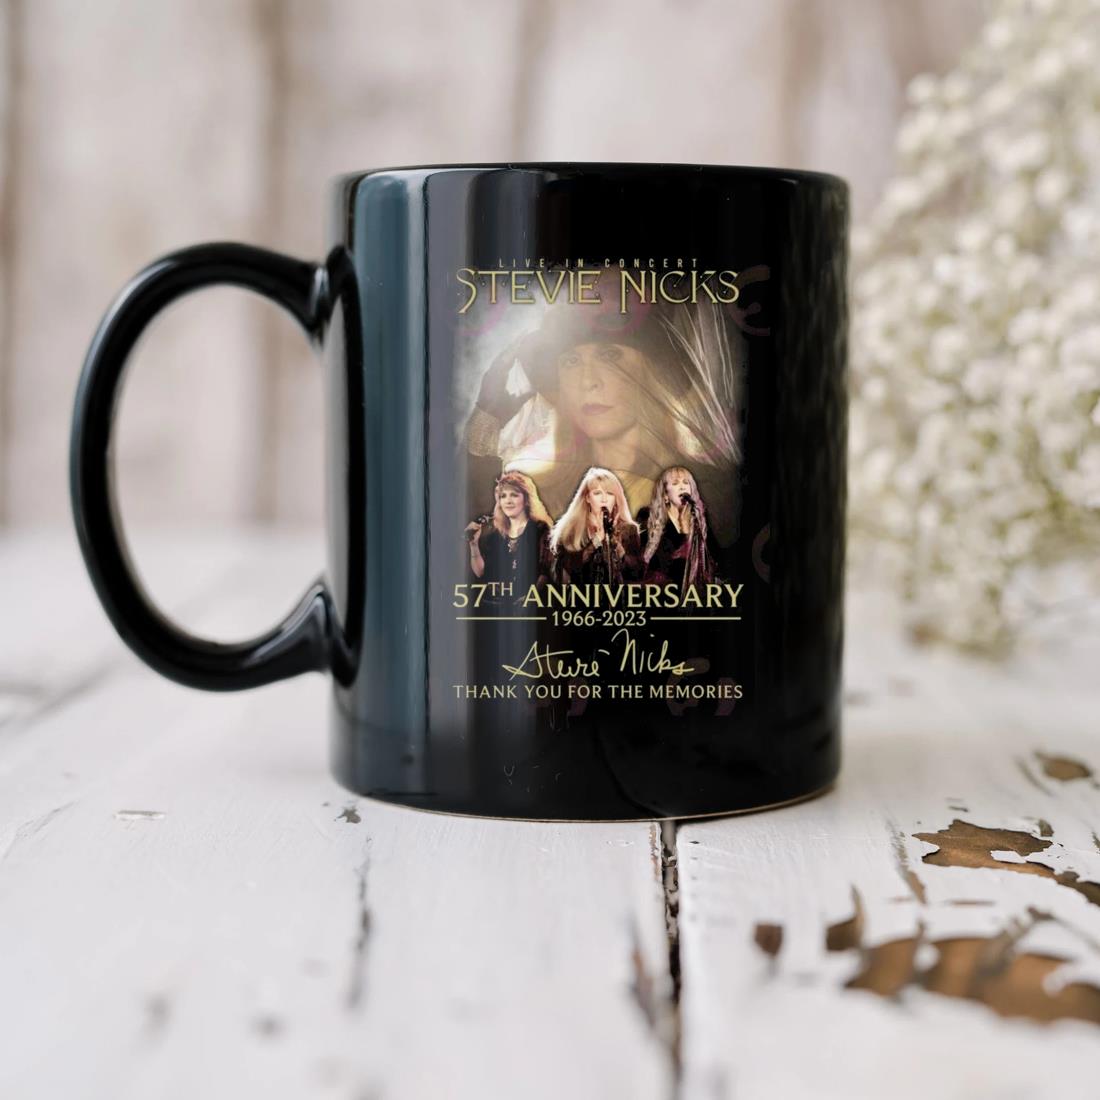 Live In Concert Stevie Nicks 57th Anniversary 1966 – 2023 Thank You For The Memories Signature Mug